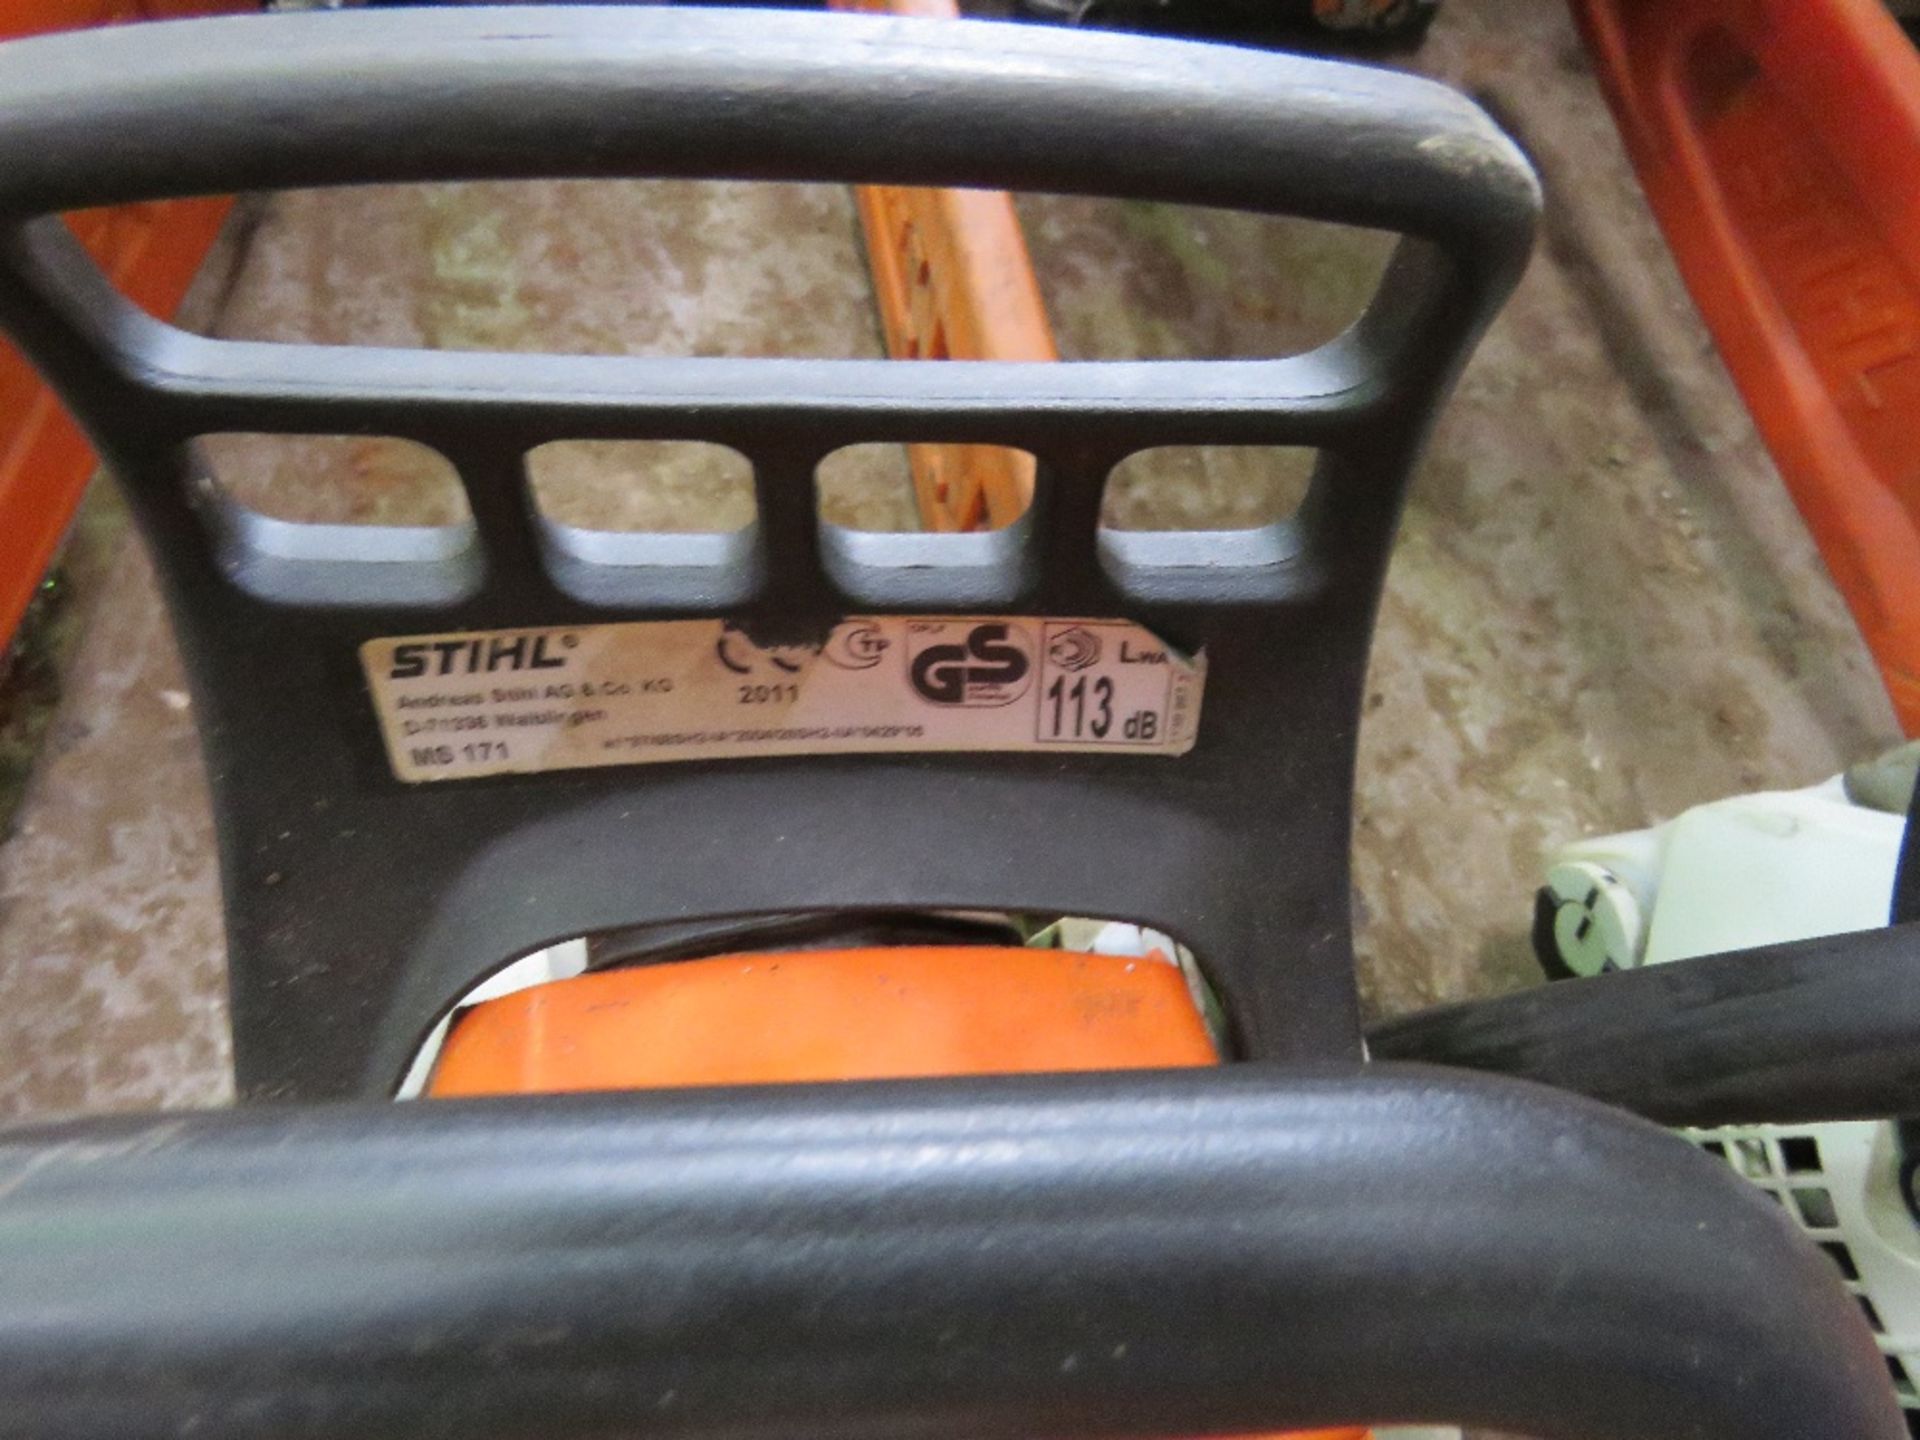 STIHL MS171 14" PETROL CHAINSAW. DIRECT FROM LOCAL COMPANY AS PART OF THEIR ONGOING FLEET MANAGEMENT - Image 2 of 2